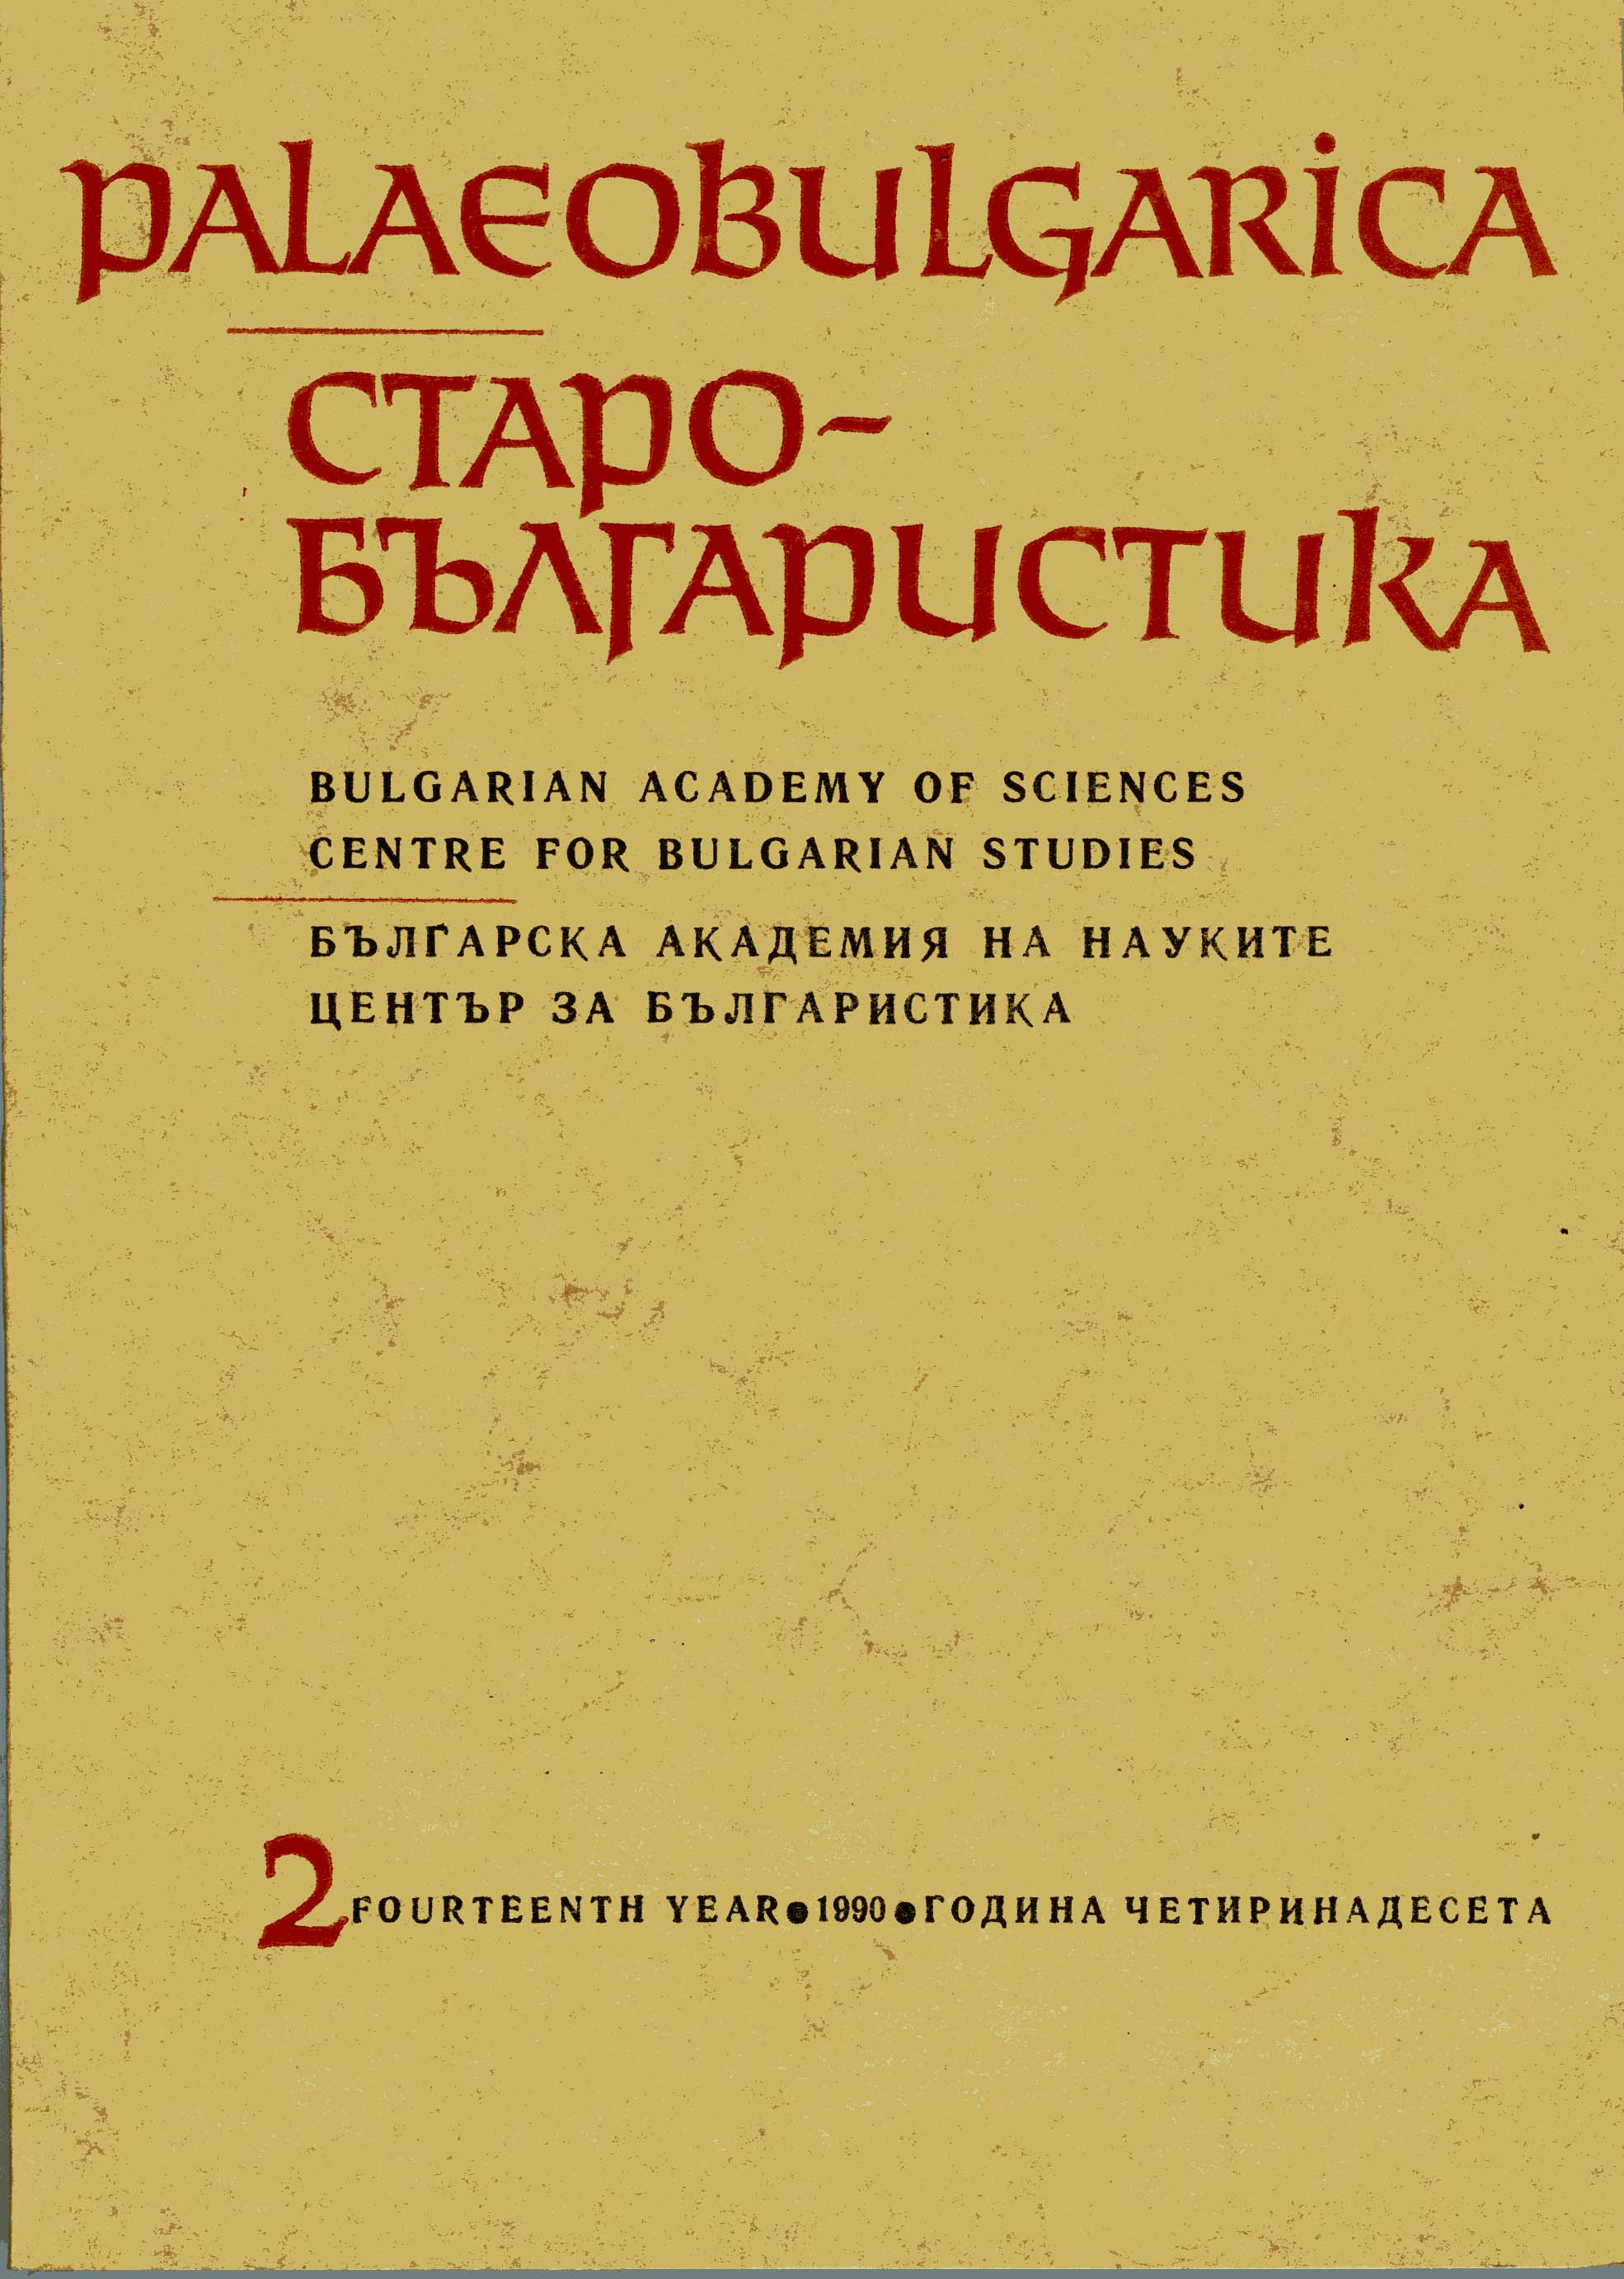 More on the History of the Cyrillo-Methodian Cultus in 17th c. Cover Image